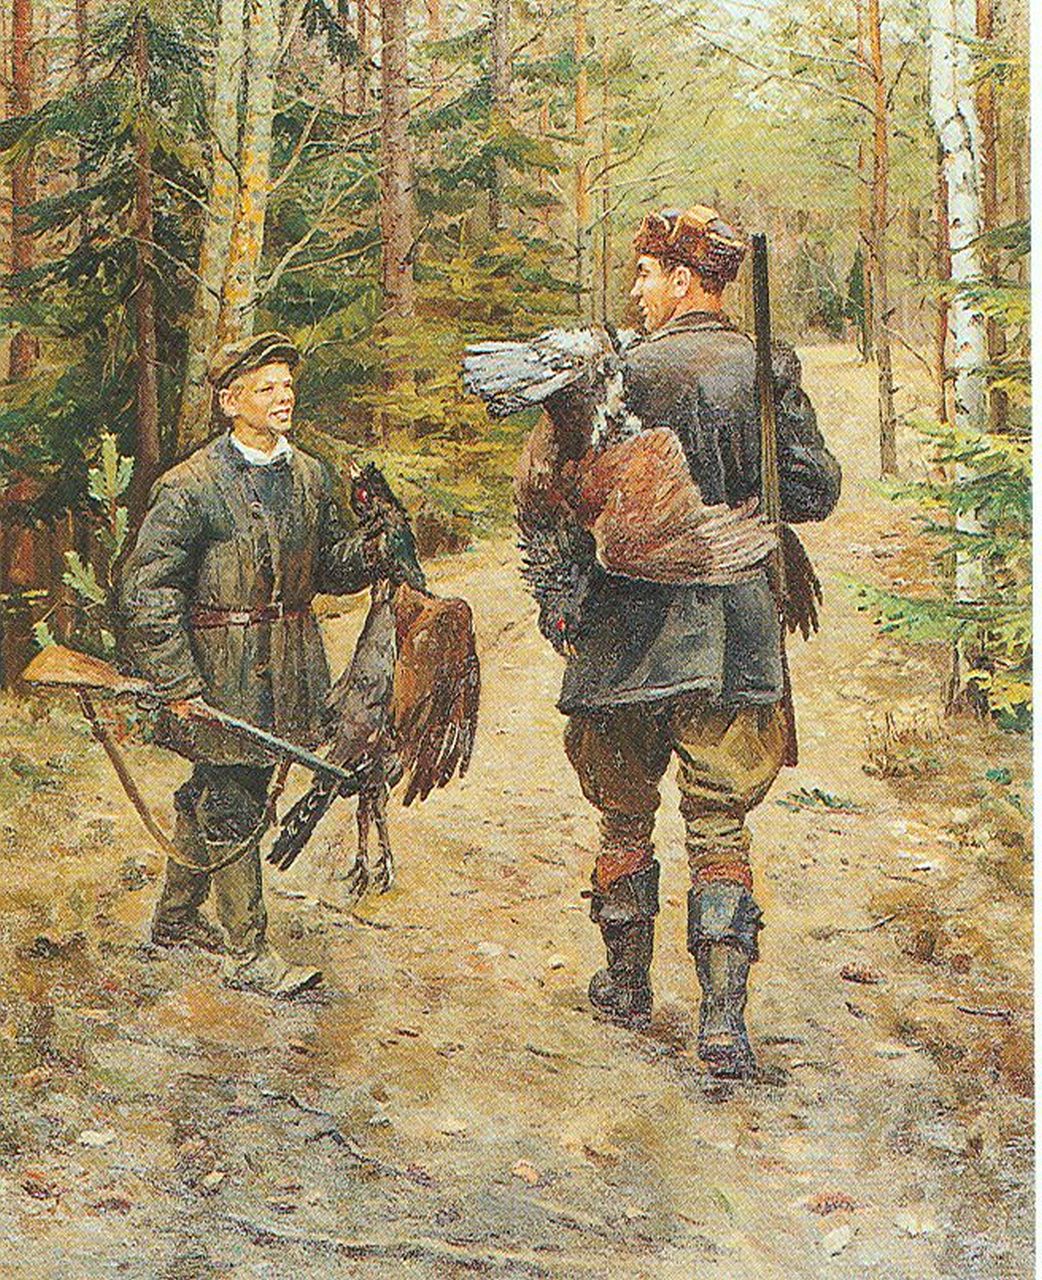 Nikolay Aleksandrovitch Sysoev | Hunters in a forest, oil on canvas, 124.0 x 100.0 cm, signed on the reverse and dated 1955